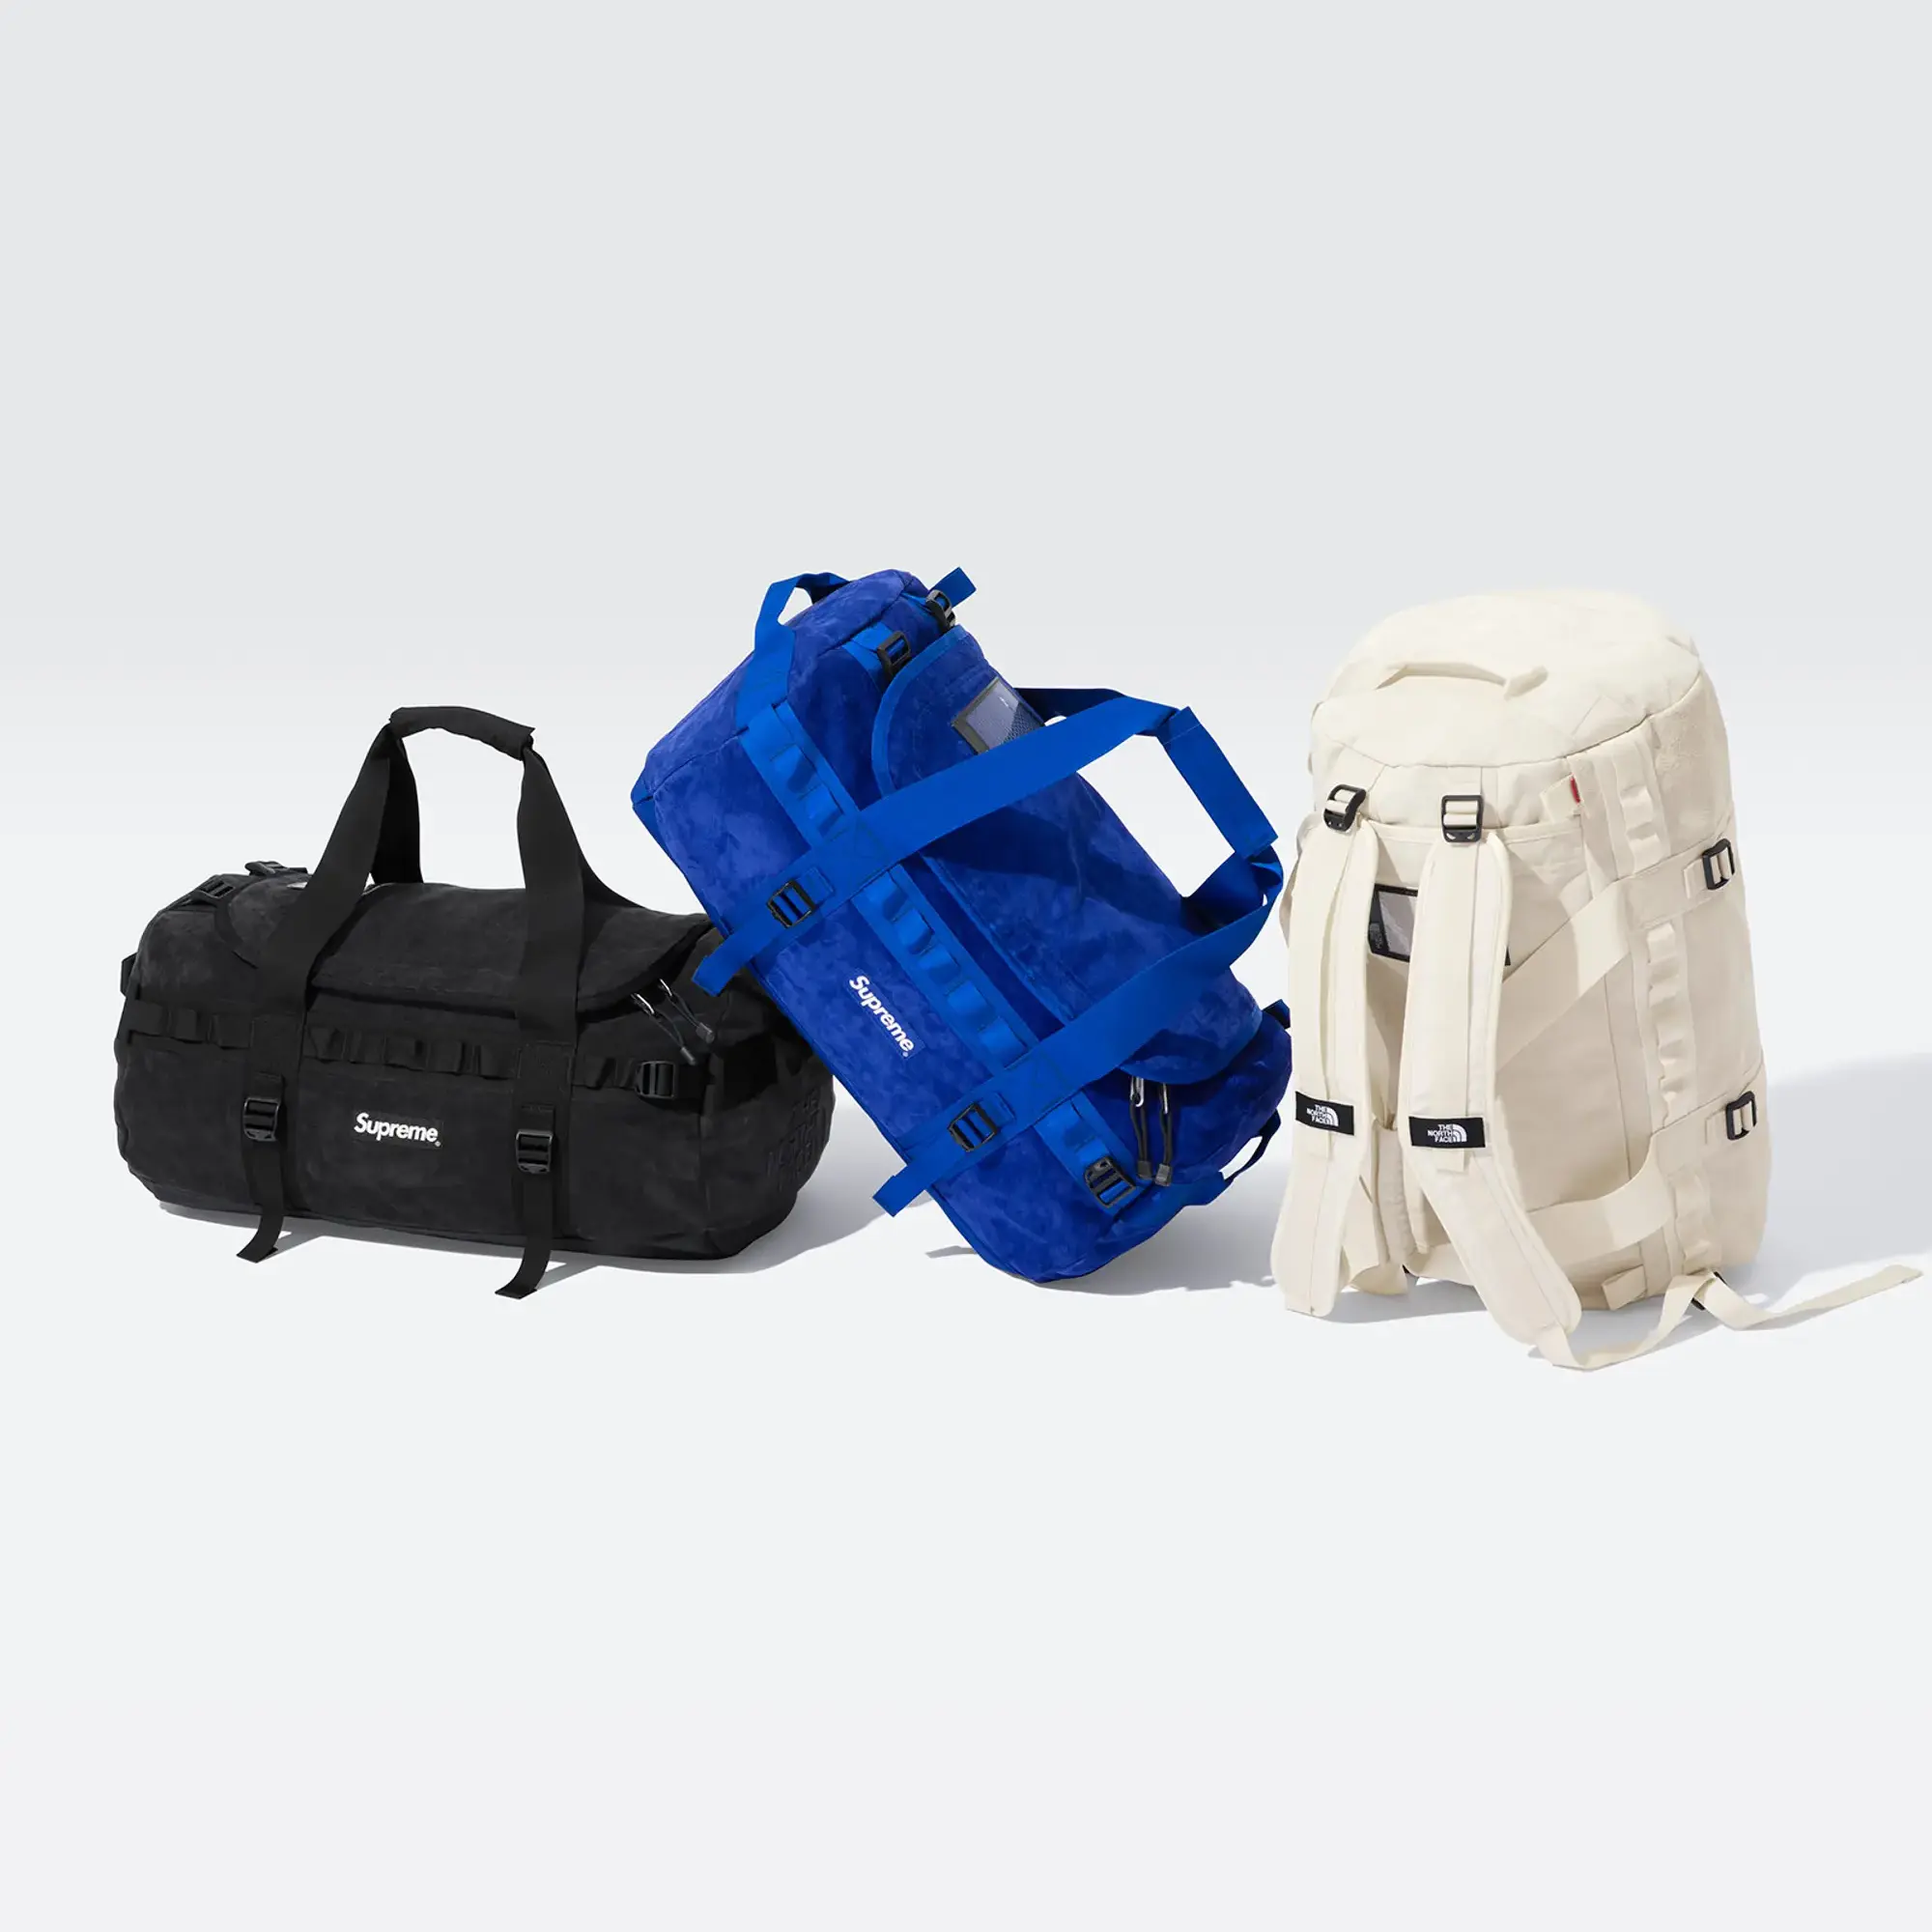 Supreme®/The North Face® Suede Small Base Camp Duffle Bag